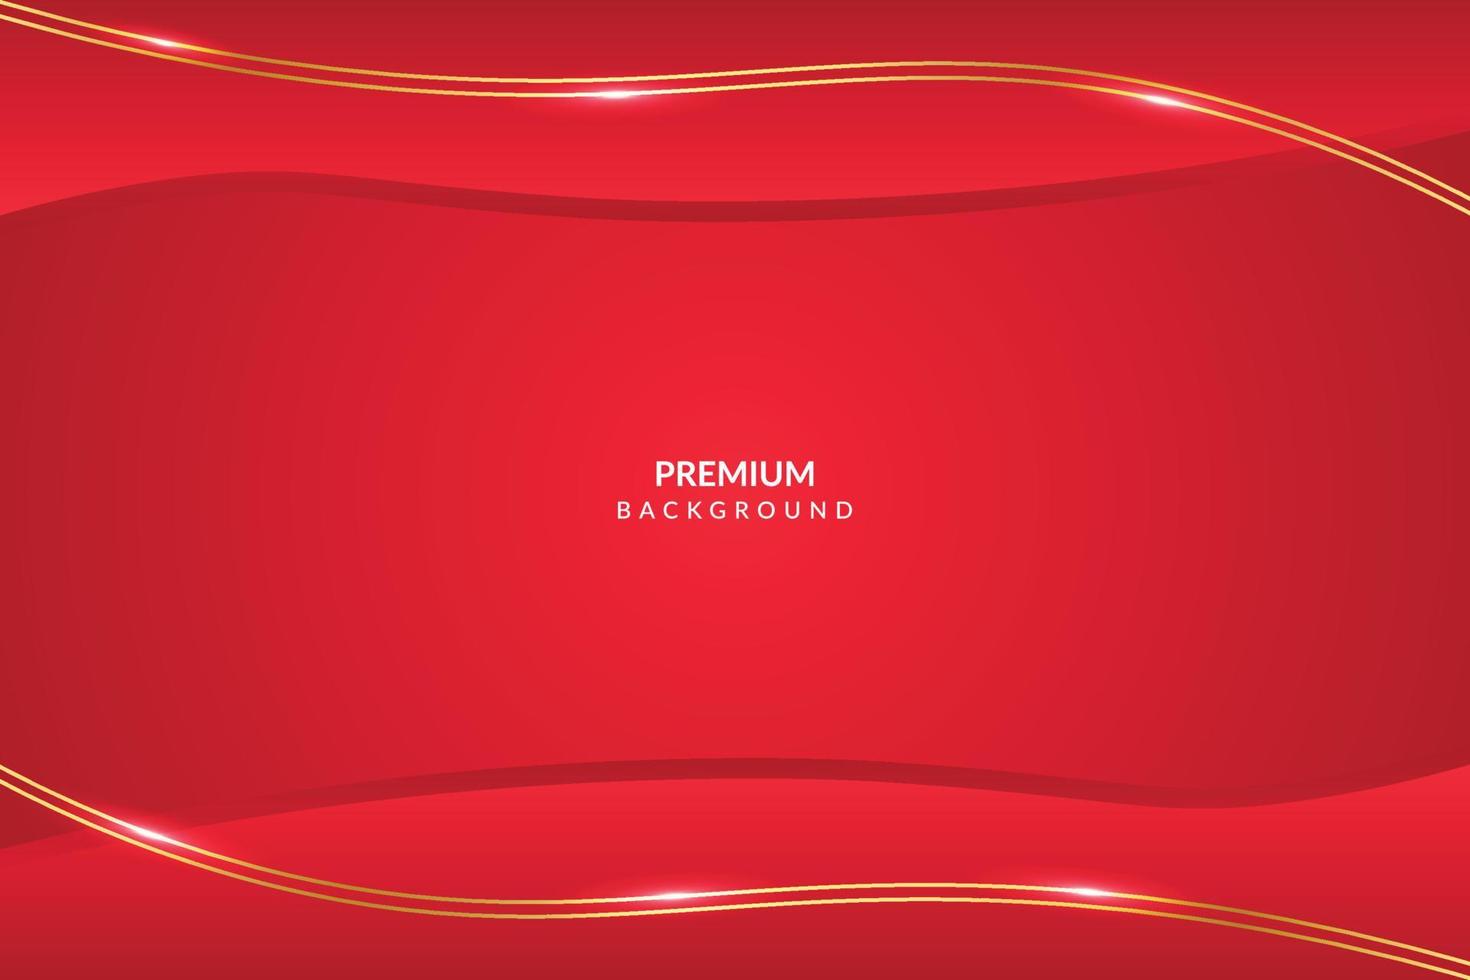 Luxury golden and red background vector design